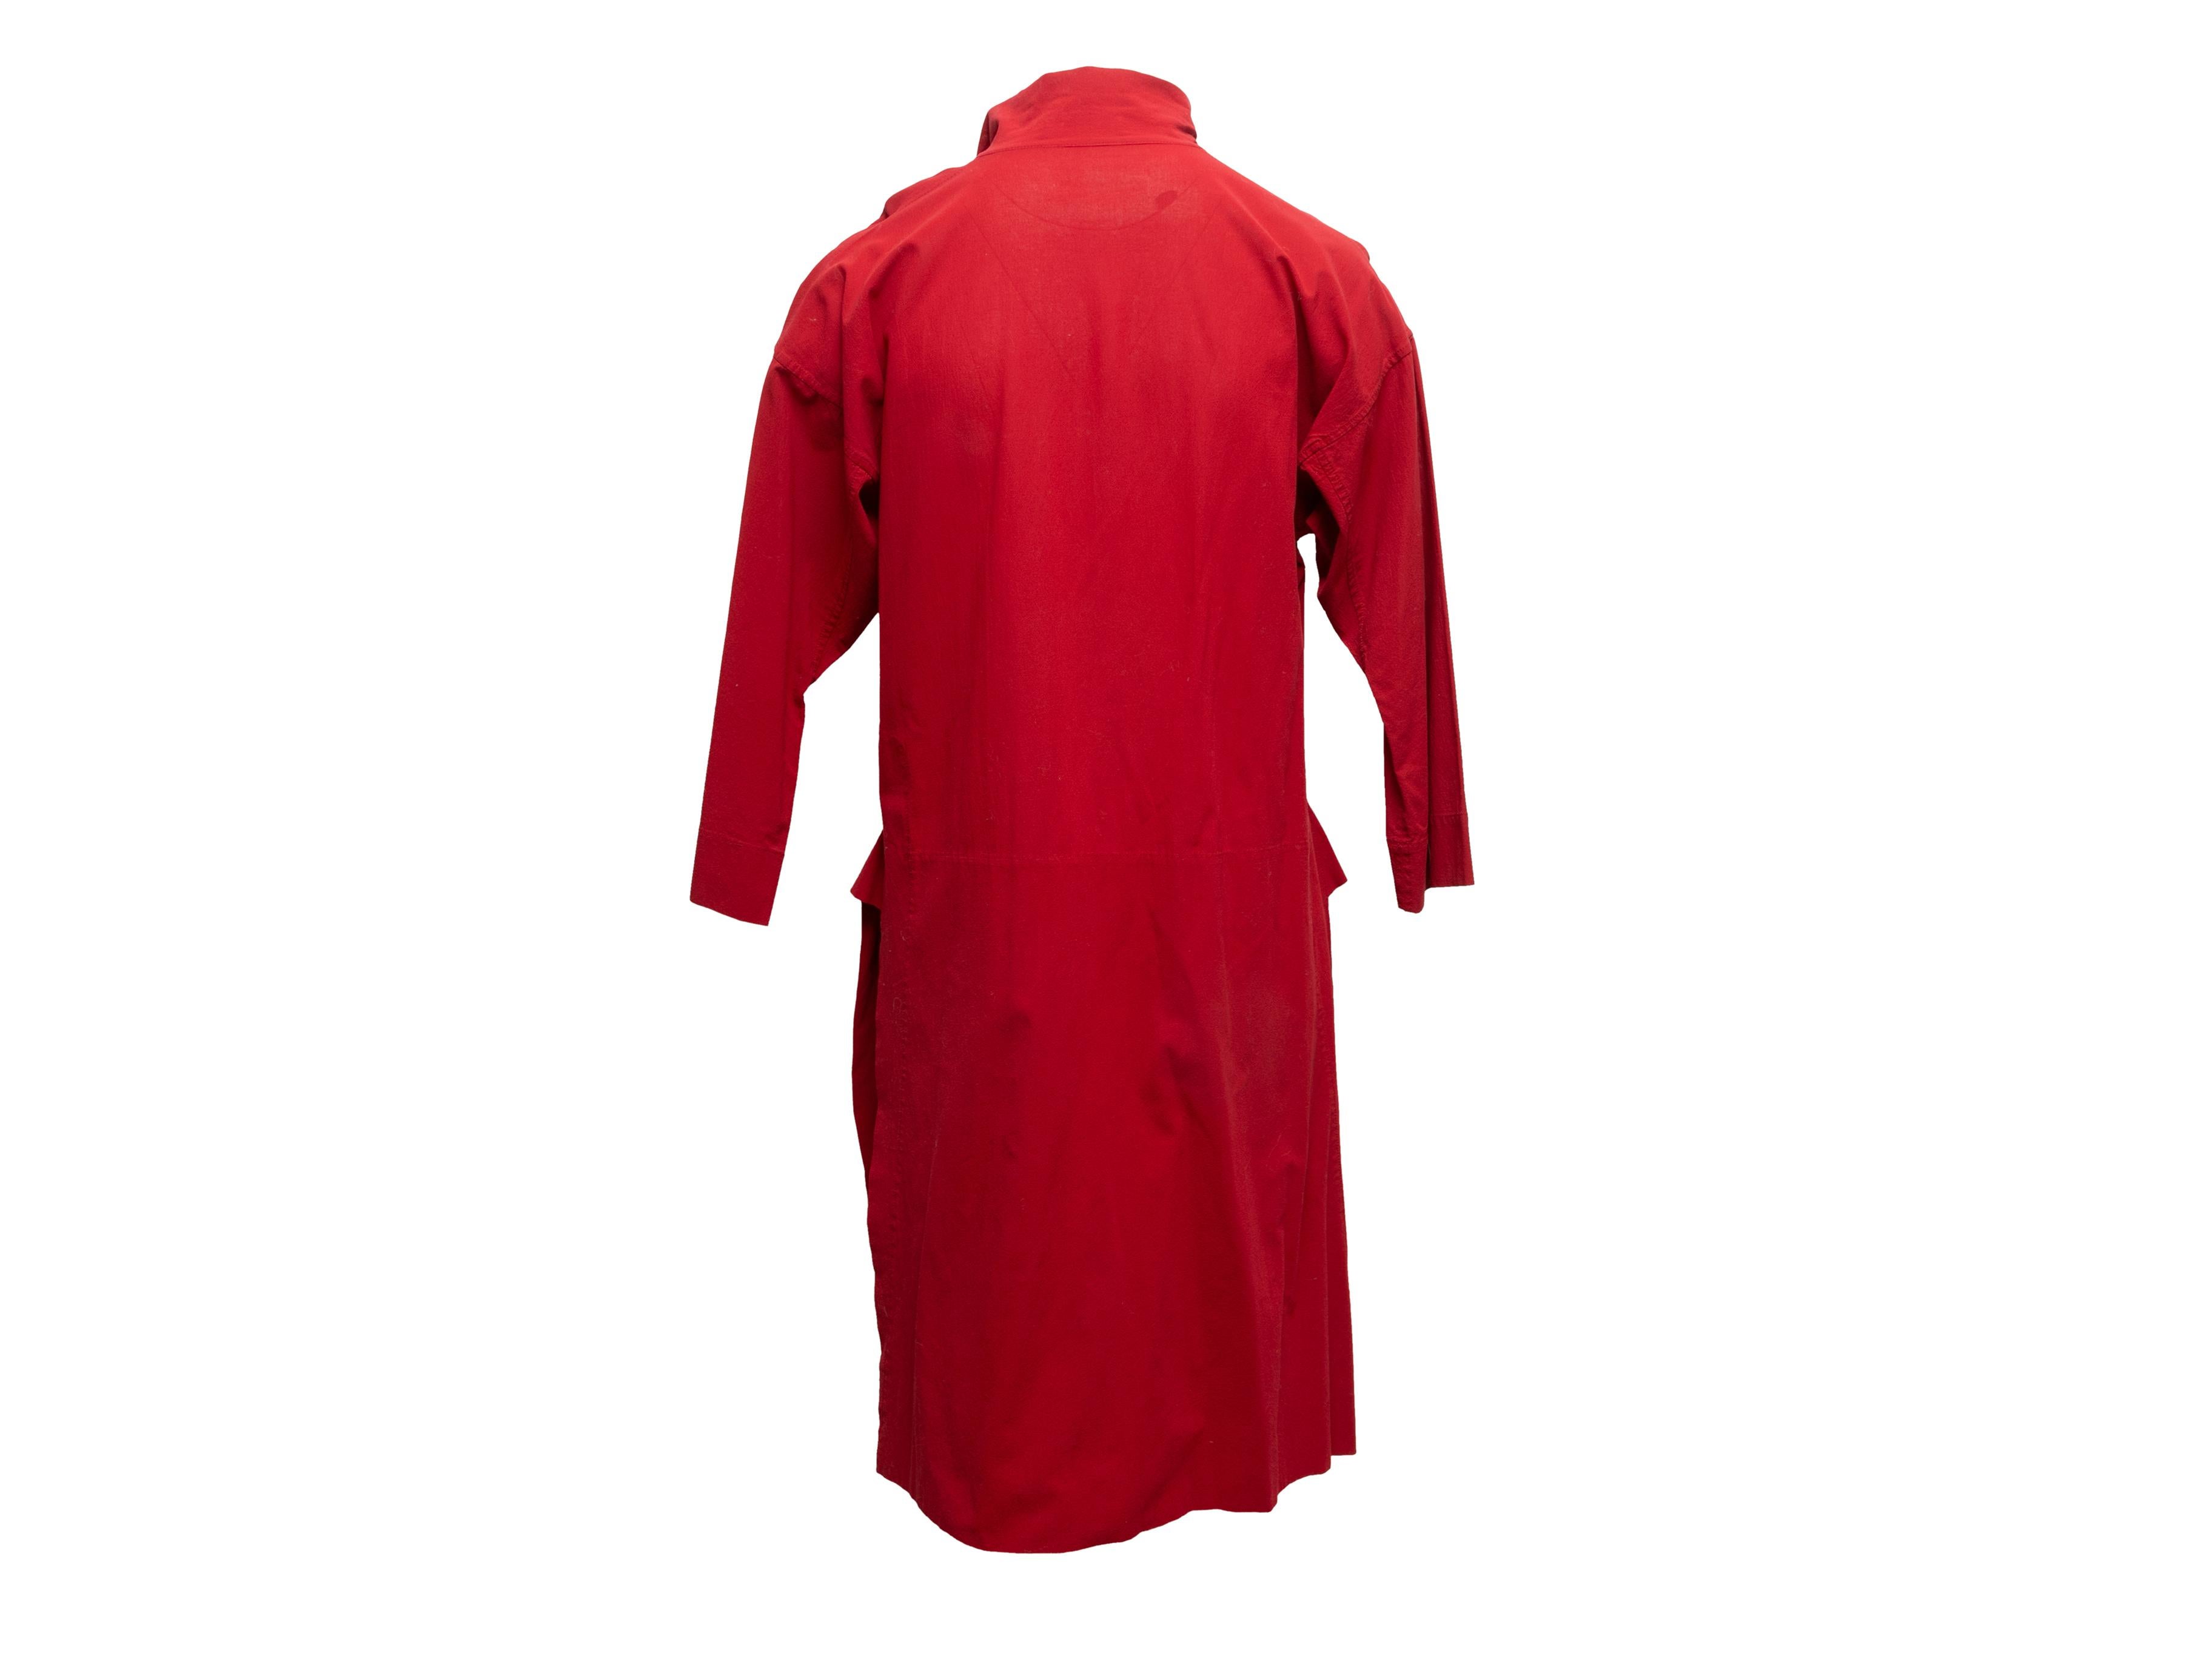 Vintage red knee-length tunic dress by Issey Miyake. Pointed collar. Slits at sides. Single pocket. Front button closures. 40